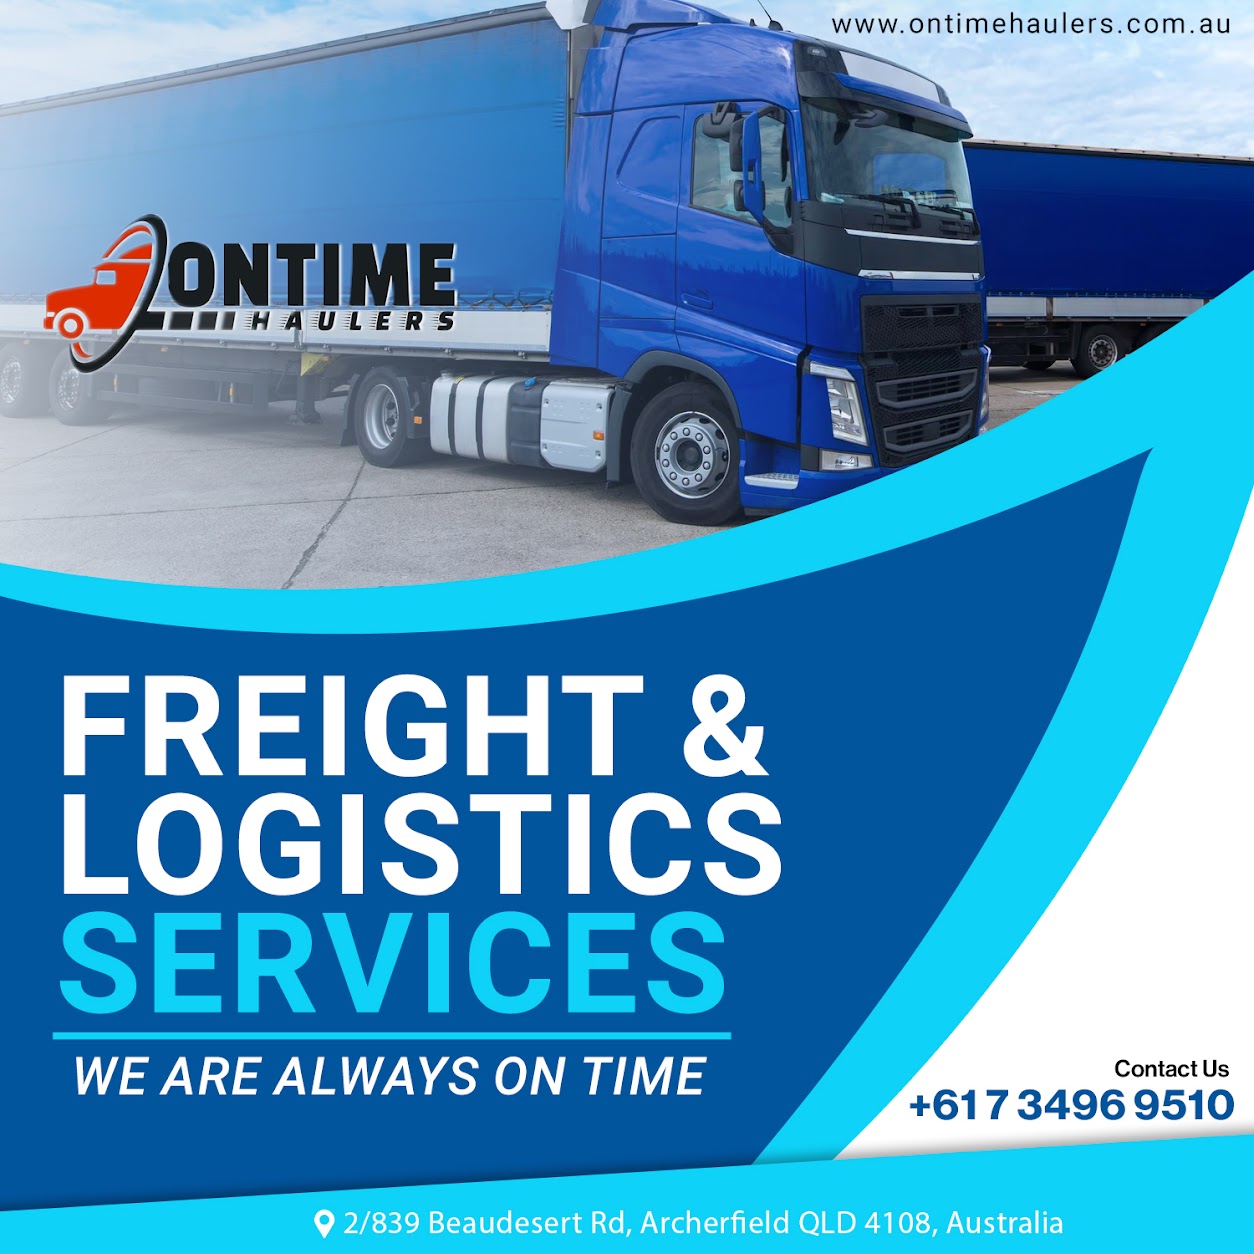 Why to choose Ontime Haulers for Courier Services in Brisbane?